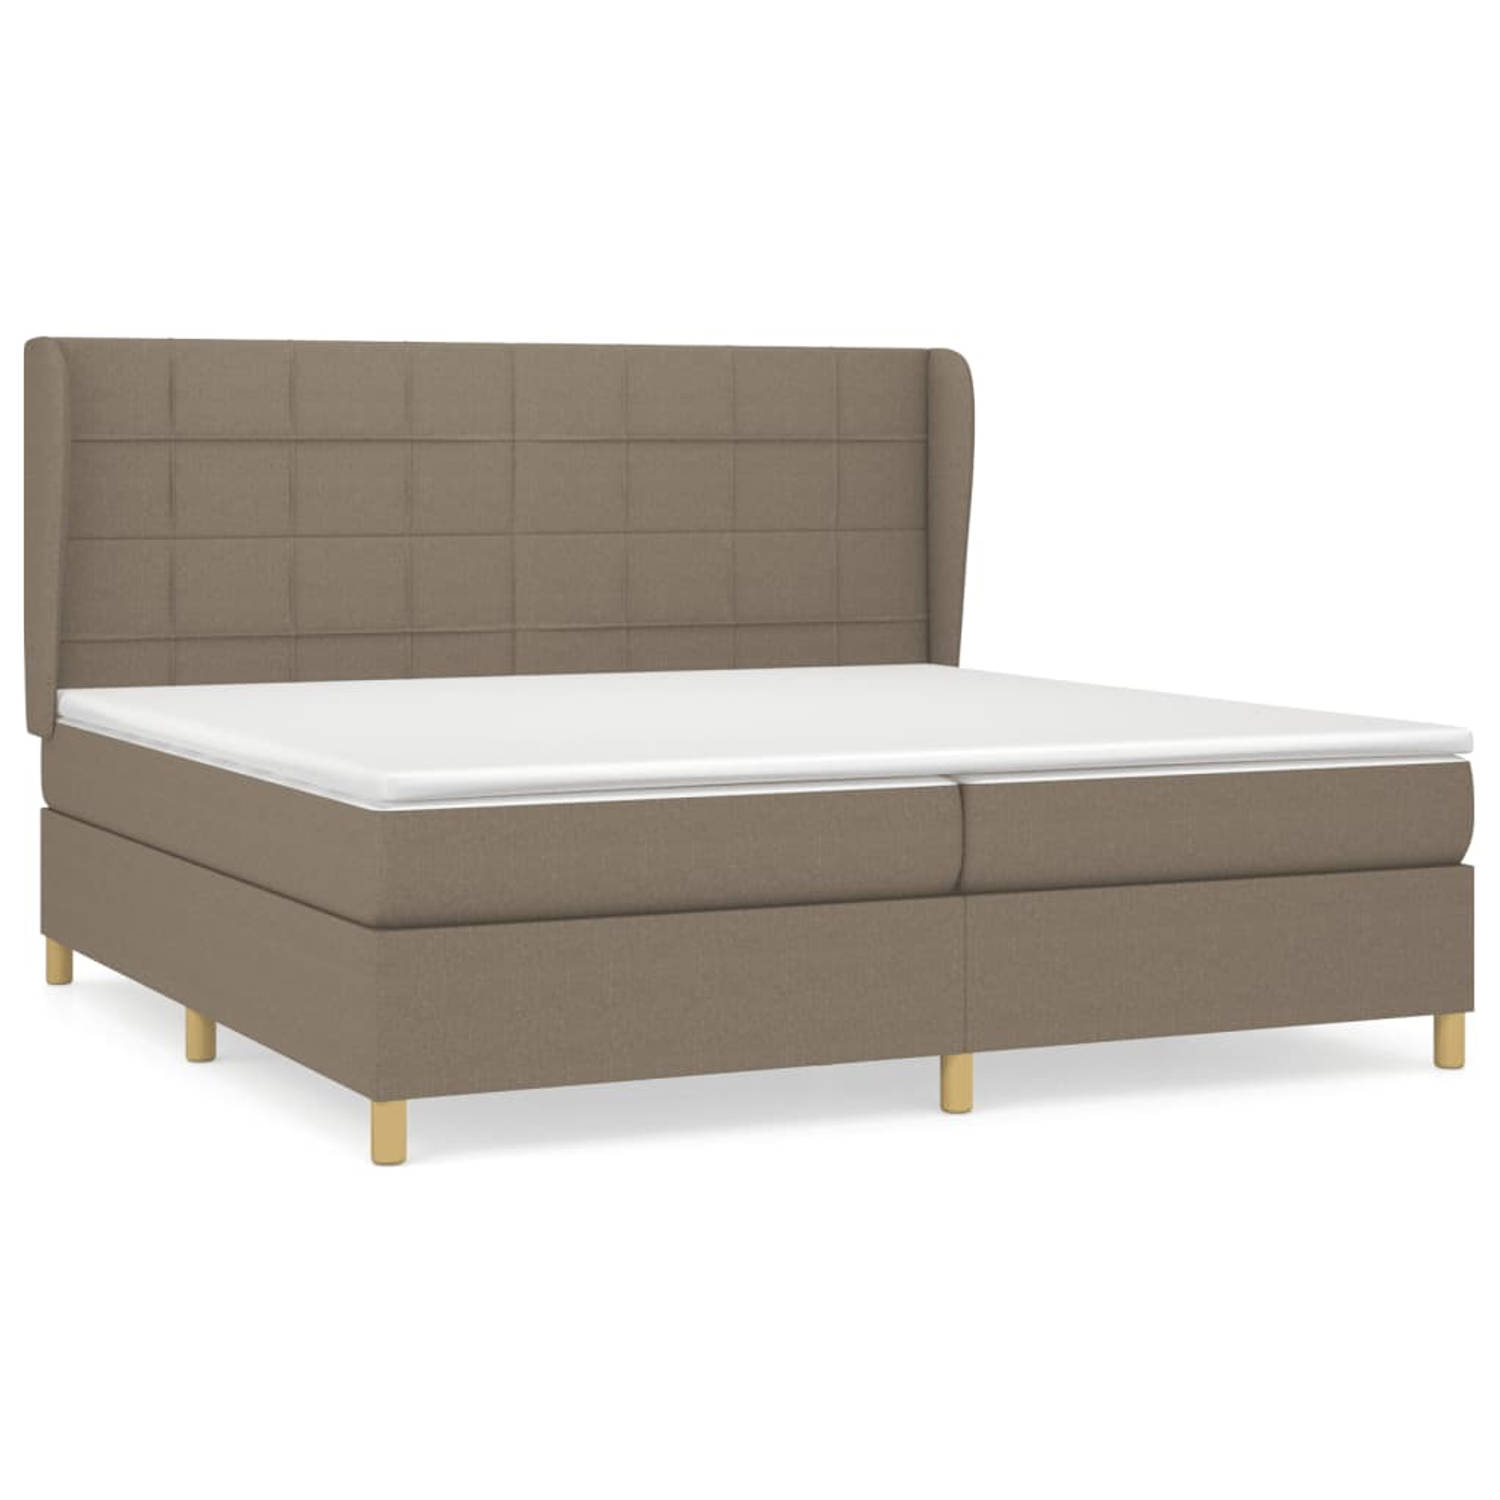 The Living Store Boxspringbed - Comfort - Bed - 203 x 203 x 118/128 cm - Taupe